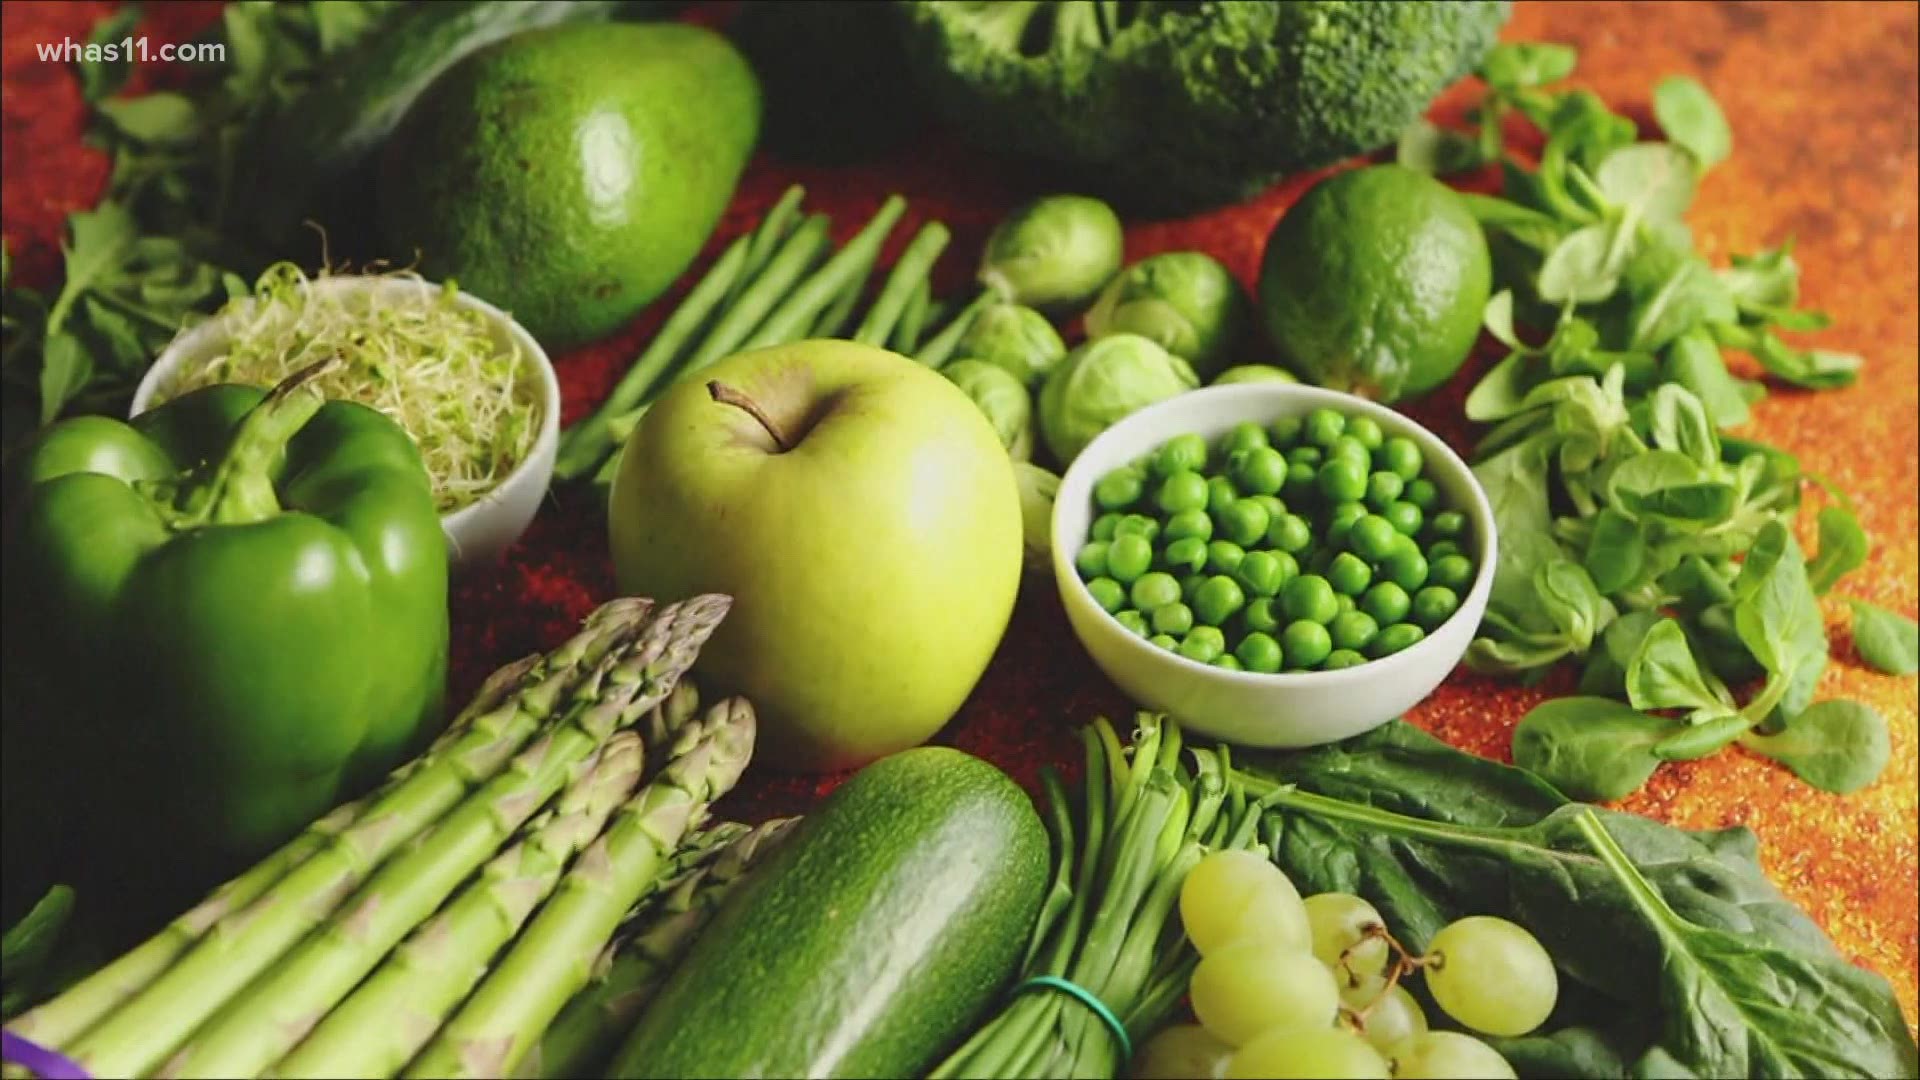 Harvard study says eating 2 fruits and 3 vegetables a day could be the key to being healthy and living longer.